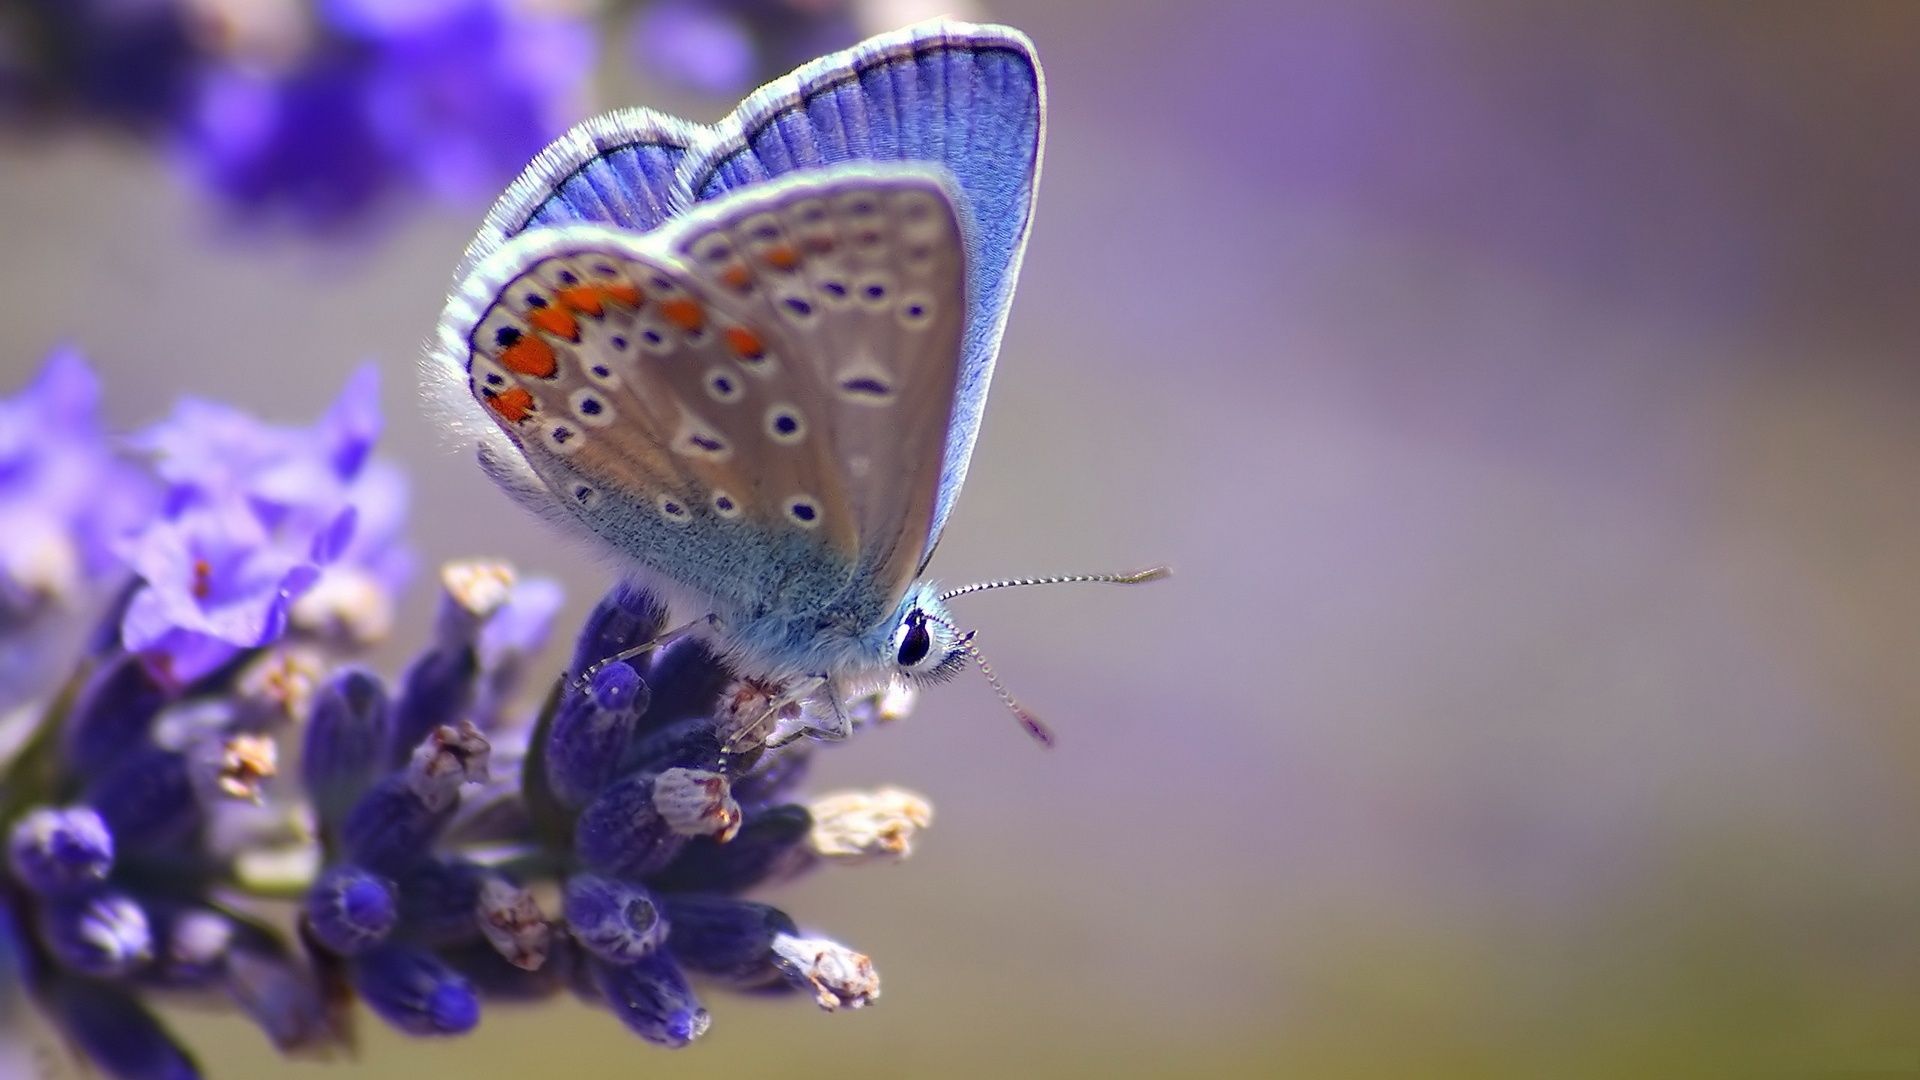 Beautiful Butterfly Wallpapers HD Pictures | One HD Wallpaper ...